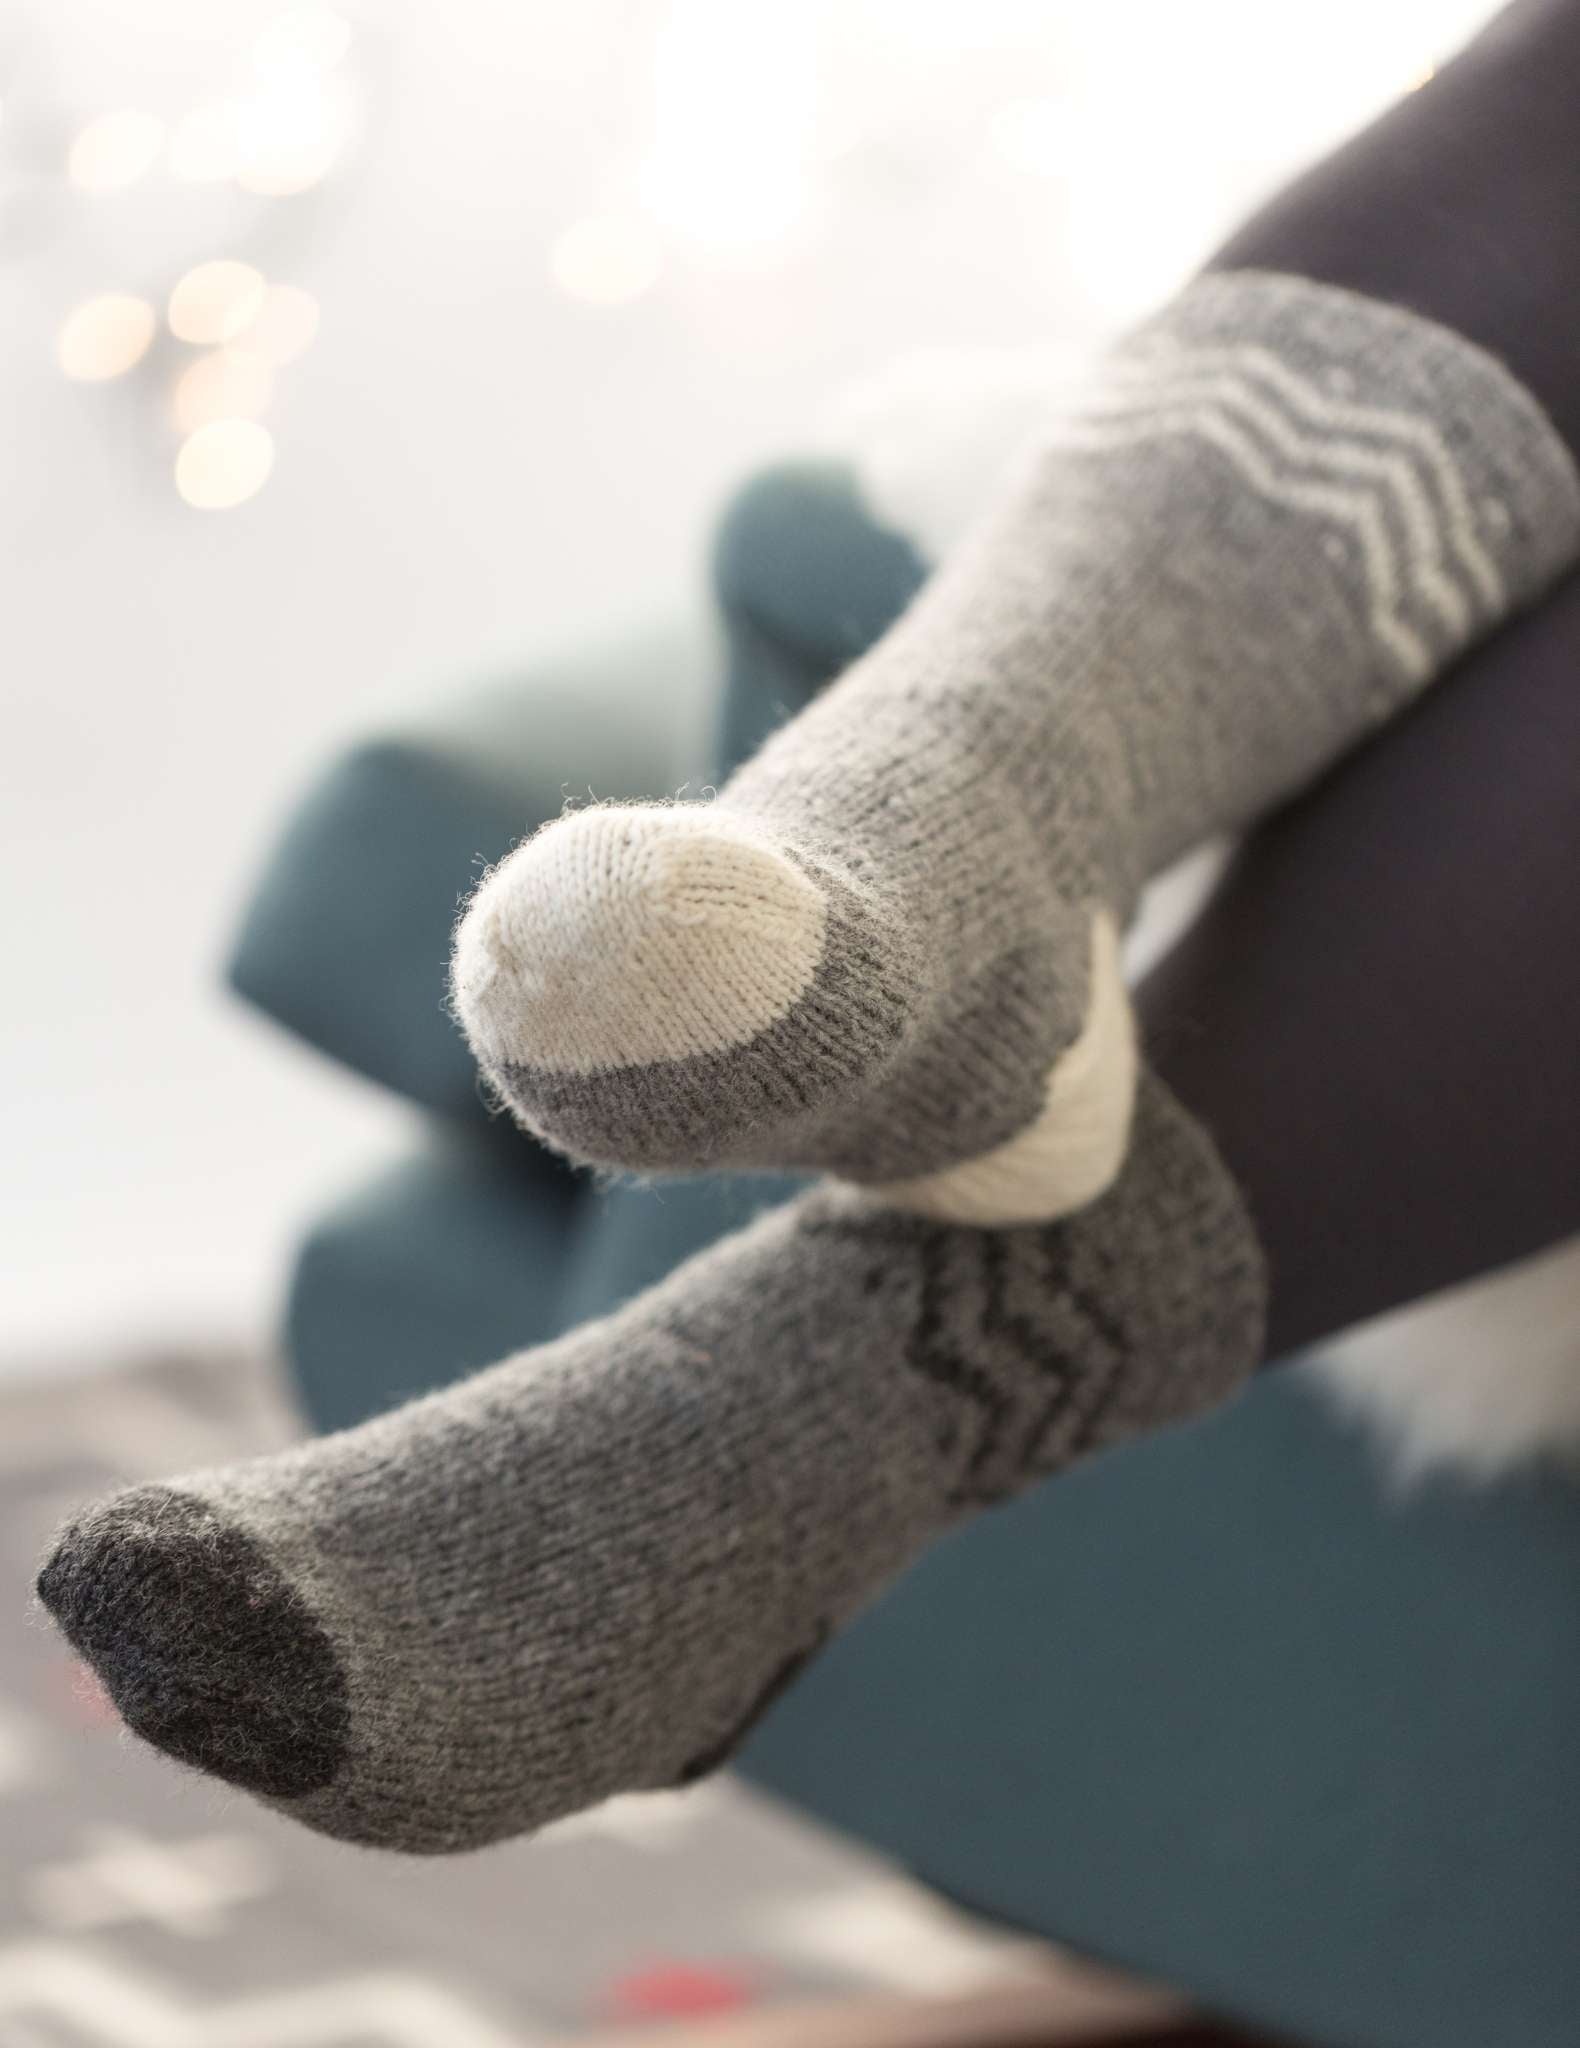 A model wears a pair of grey socks with colourwork around the cuff and contrast heels and toes. The contrast for one sock is white, and the other is dark grey.